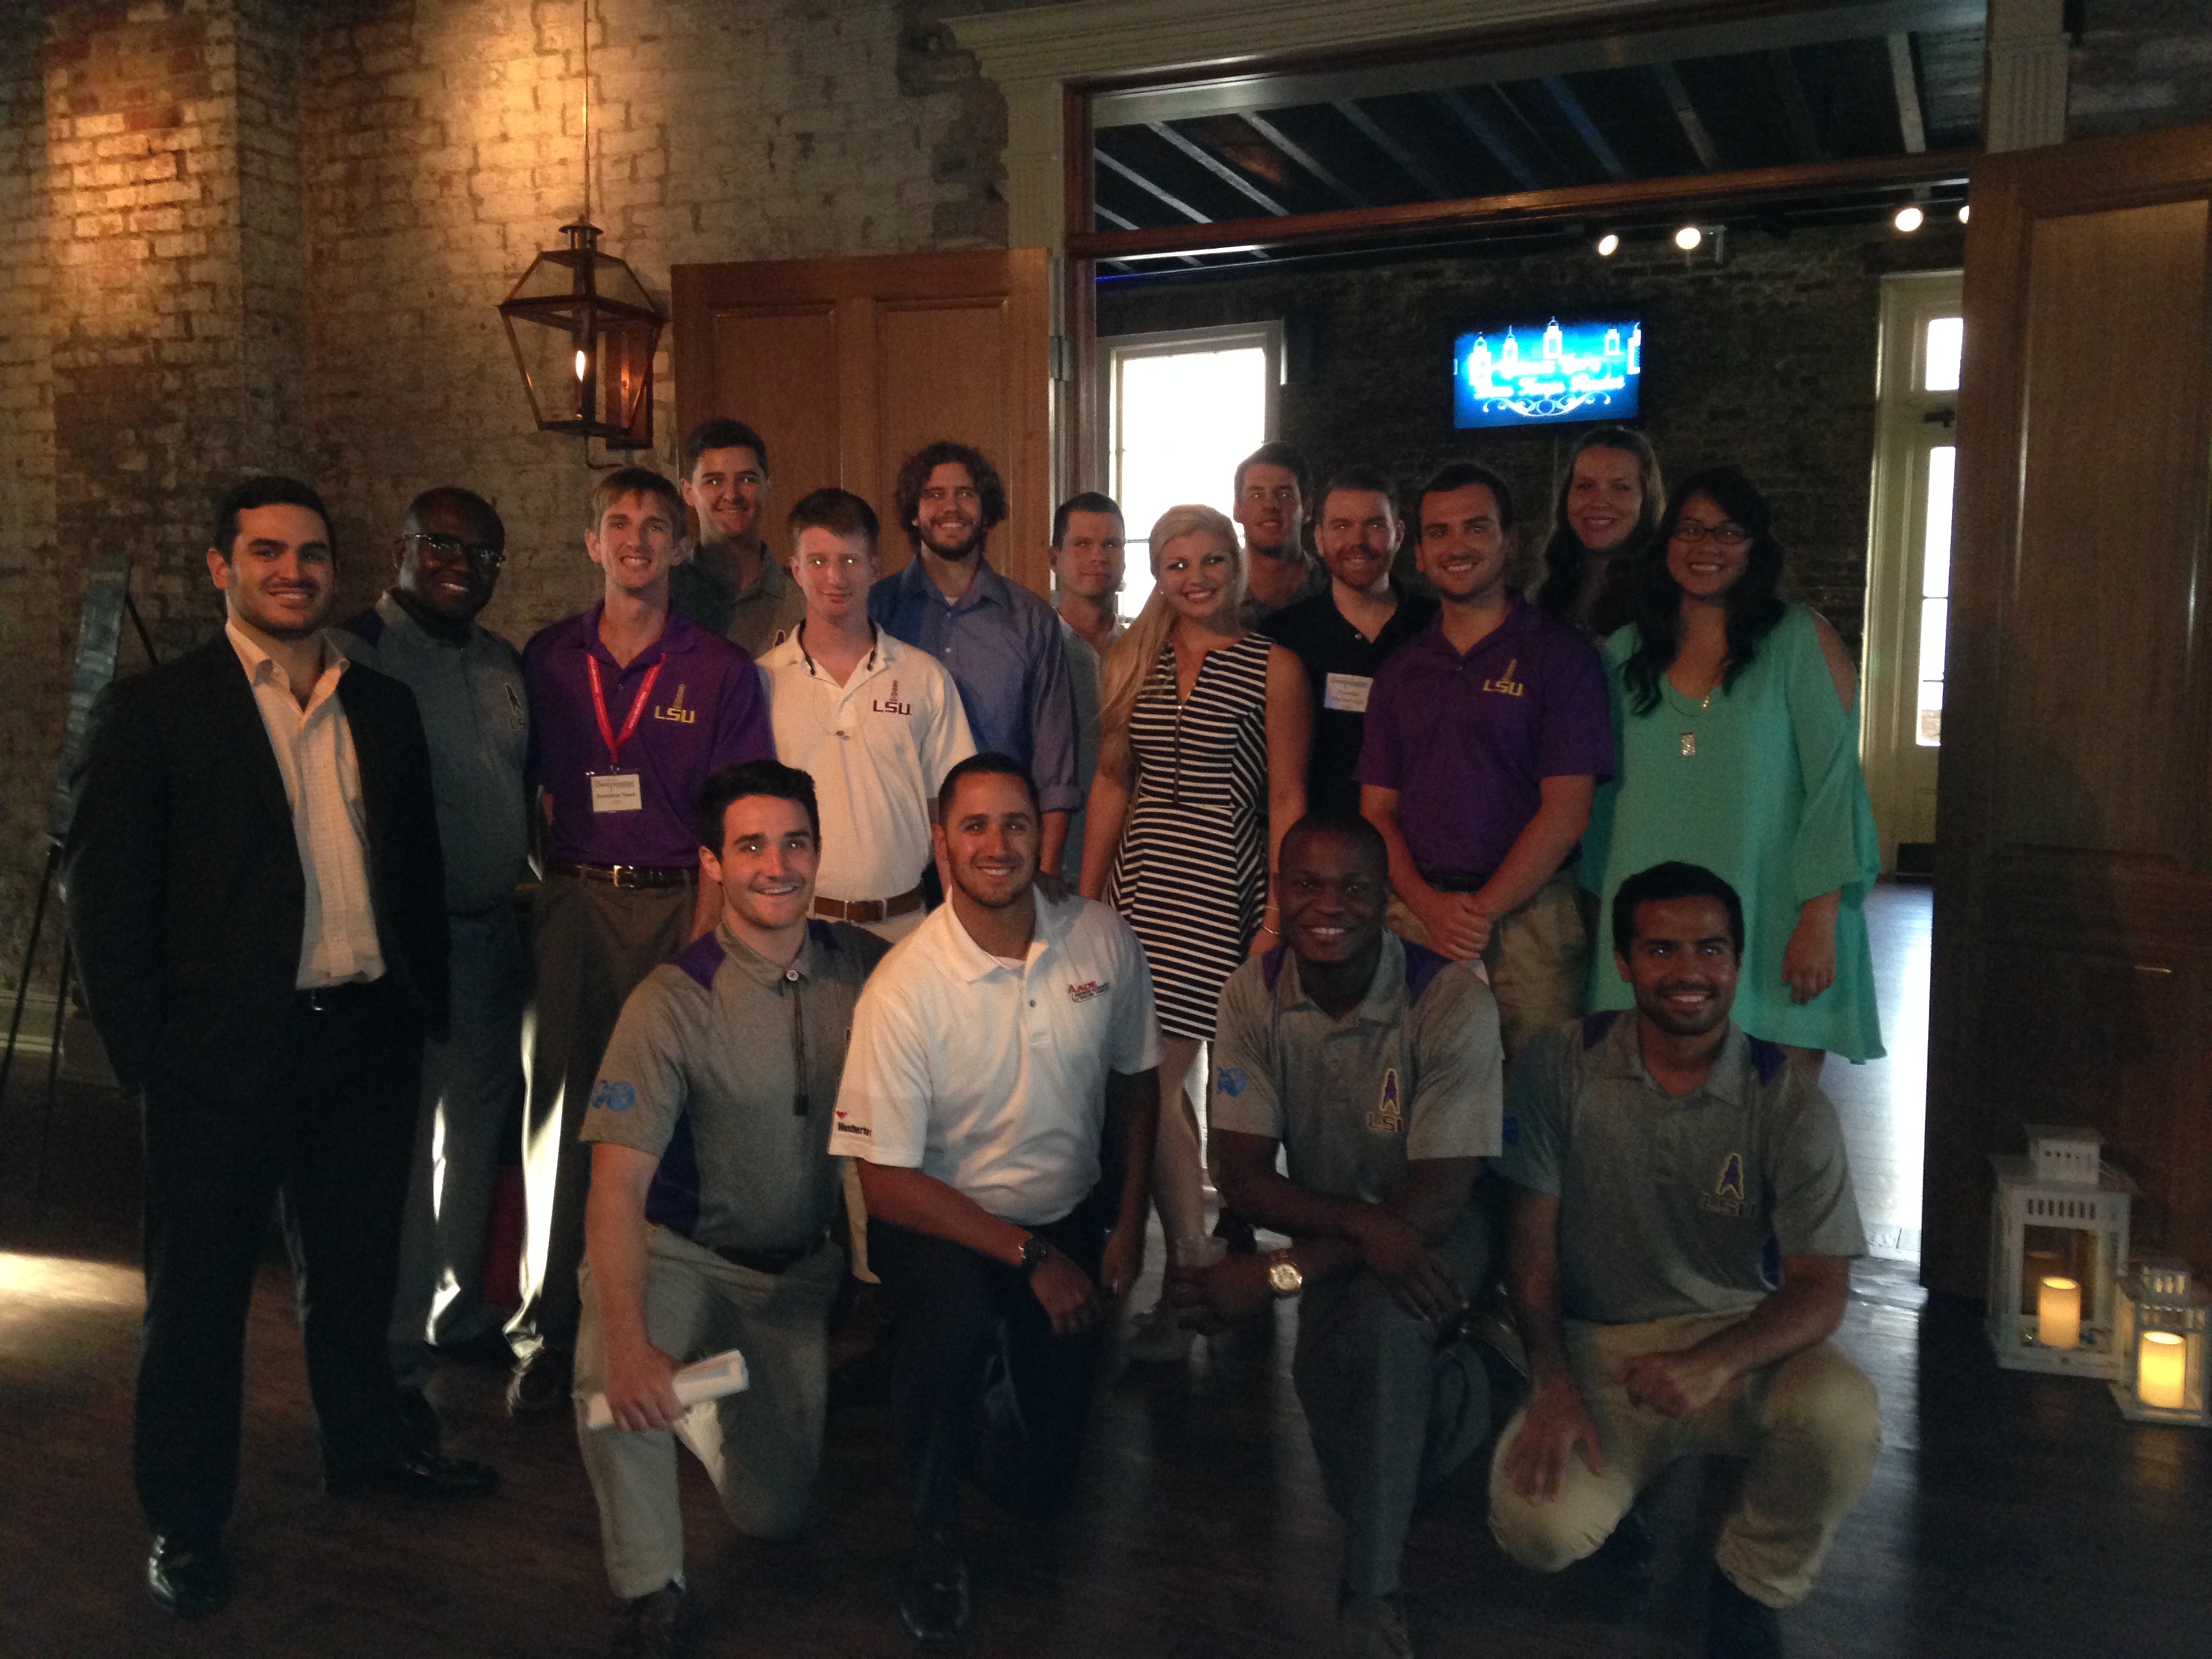 LSU SPE students attend the 19th annual Deepwater Technical Symposium and volunteer at the Charity Gala